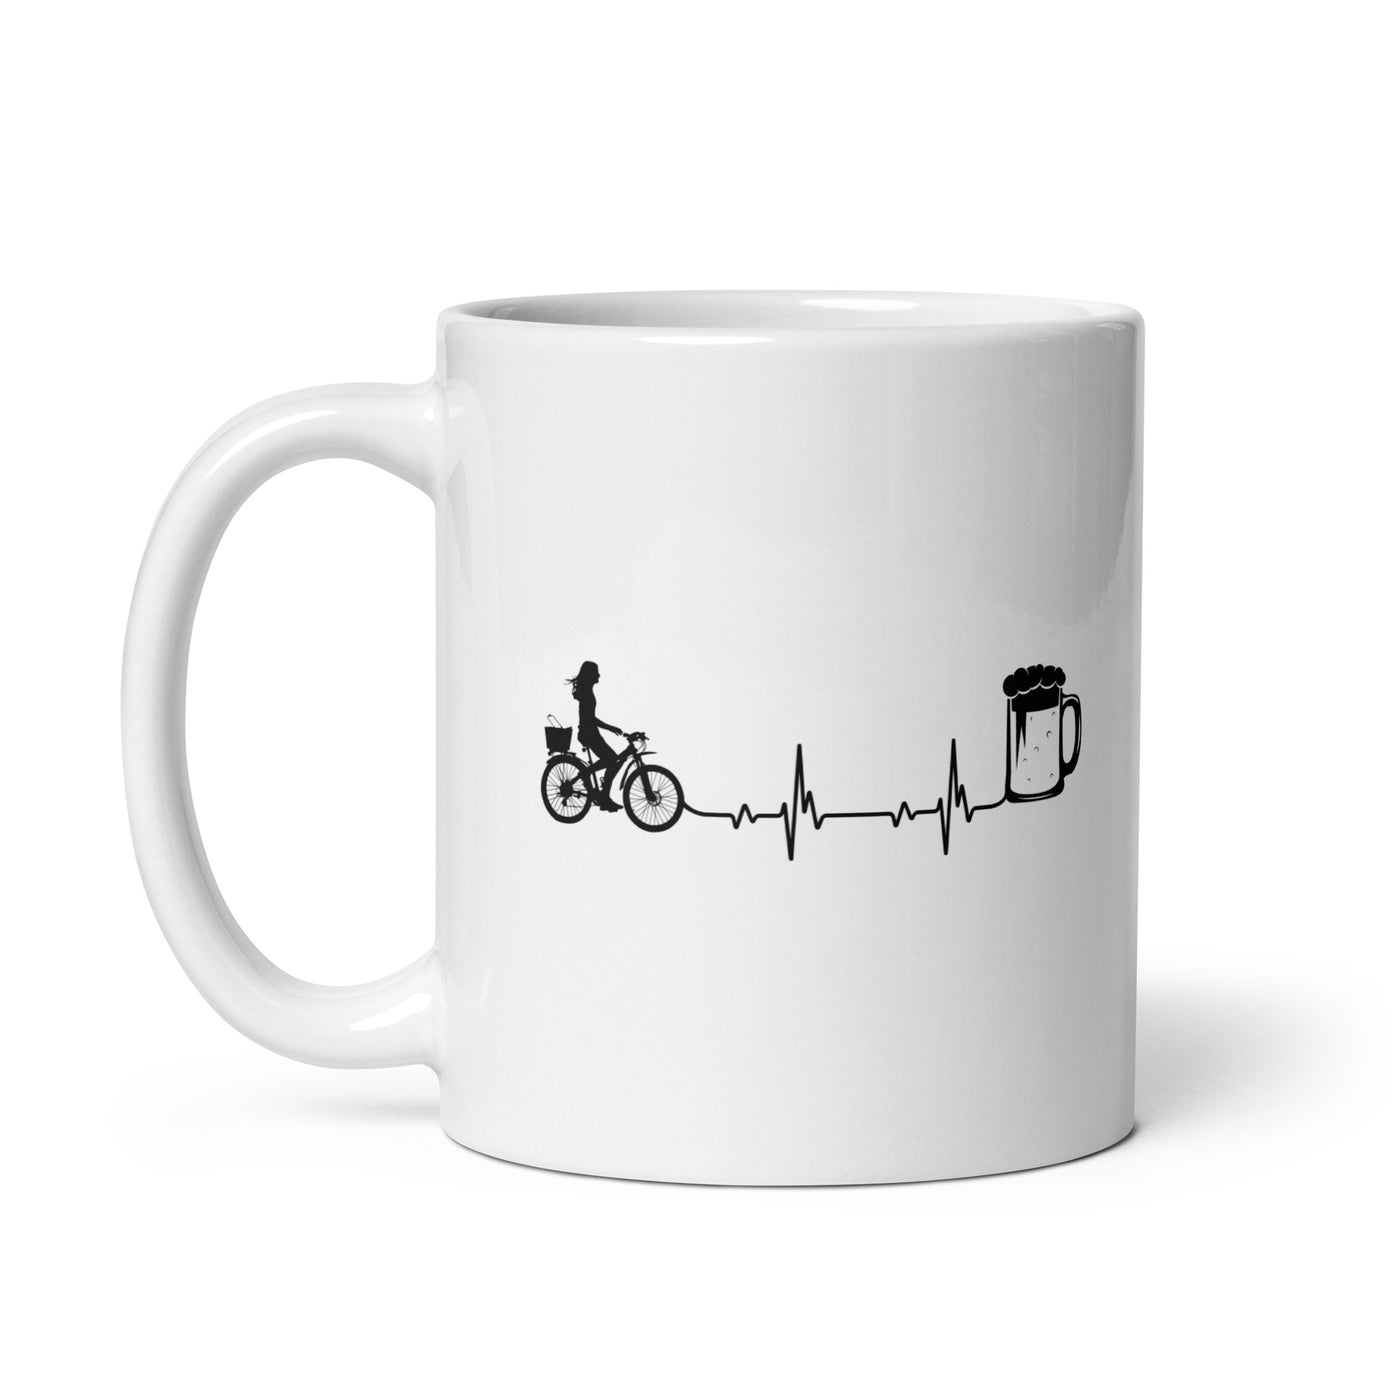 Heartbeat Beer And Cycling - Tasse fahrrad 11oz